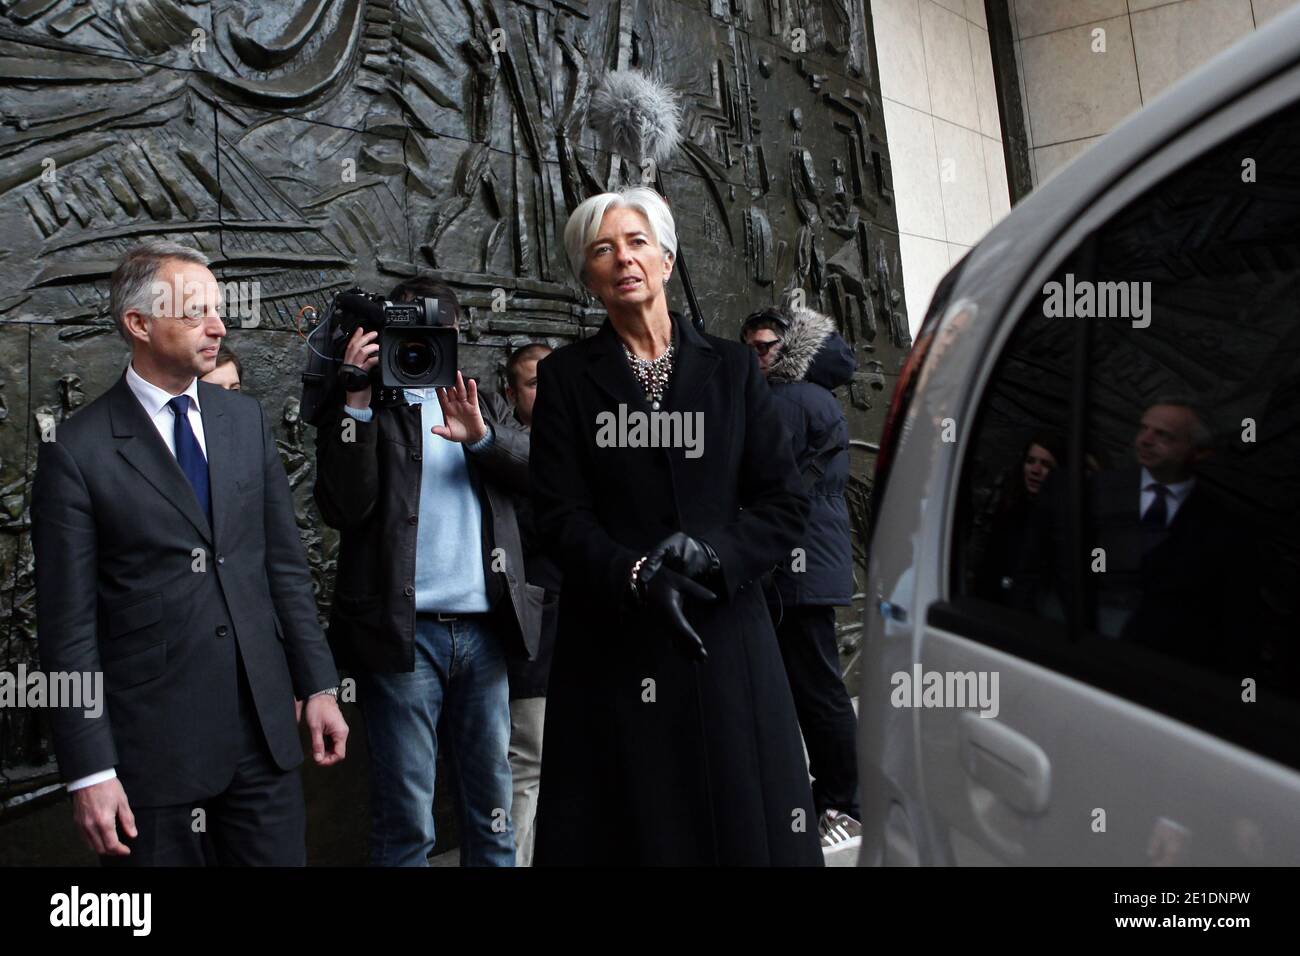 French Minister for the Economy, Finance and Industry Christine Lagarde shows how to charge the batteries of an Ion Peugeot full electric car near Peugeot Managing Director Vincent Rambaud, in Paris, France, on January 20, 2011. The Economy ministry will use the four seat four-door city ion car, launched at the end of 2010. Photo by Stephane Lemouton/ABACAPRESS.COM Stock Photo